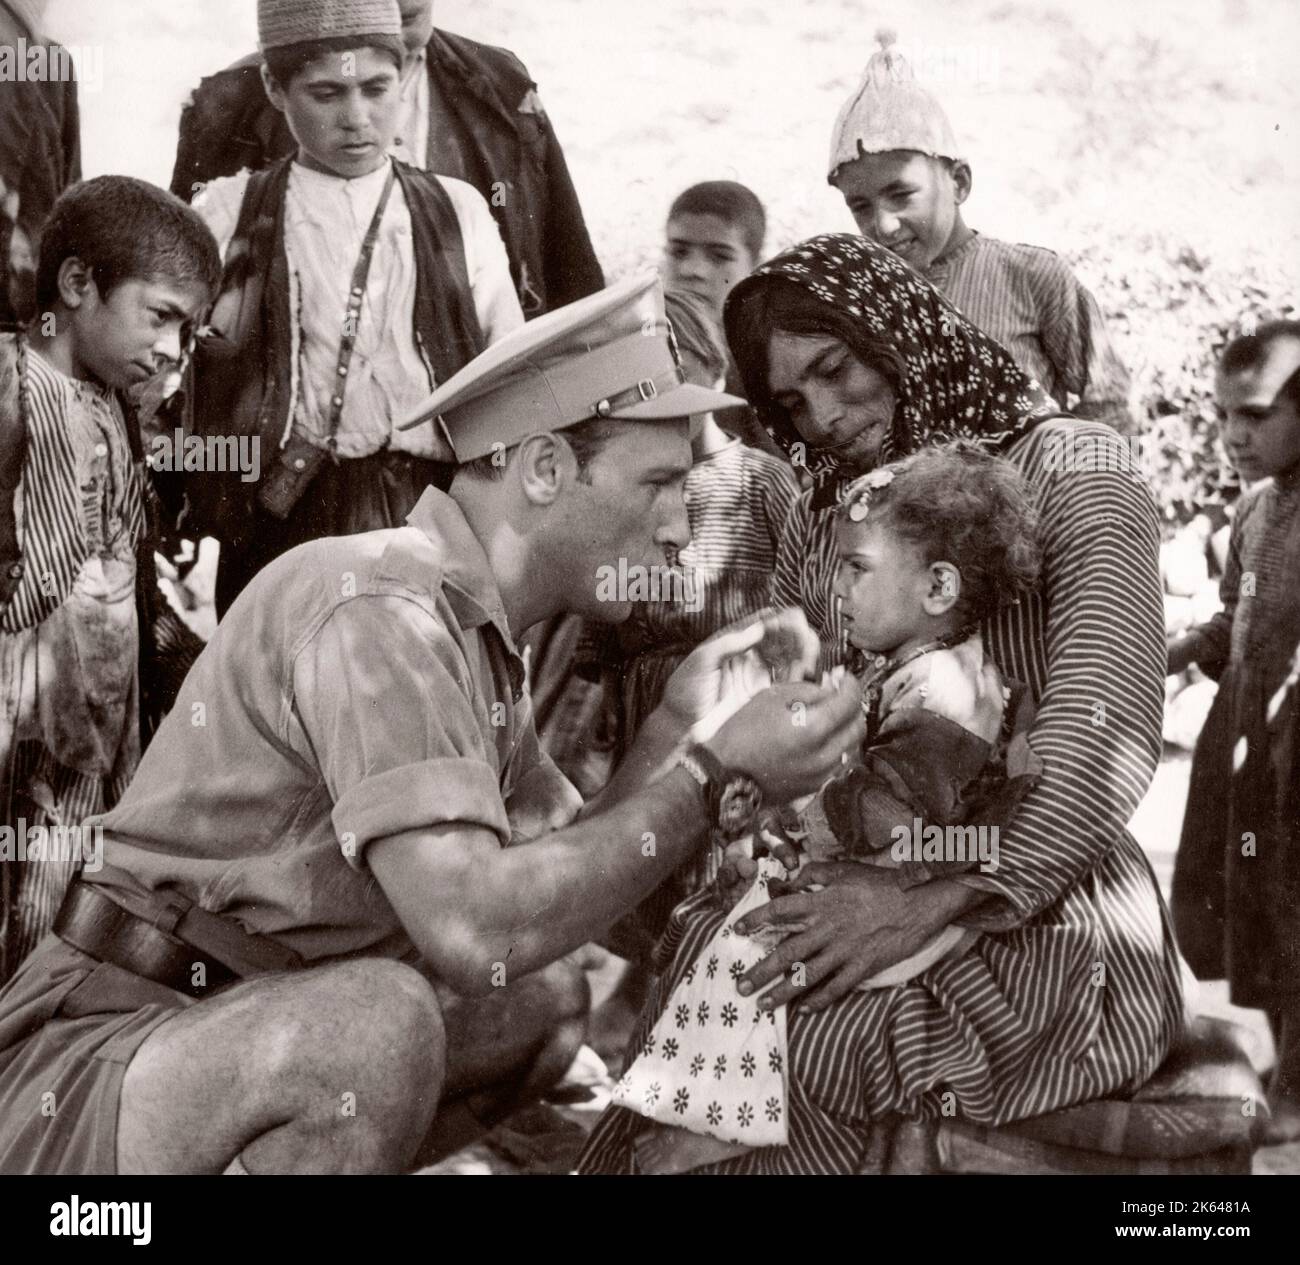 1943 Syria - British military office treats Kurdish people along the Syria Turkey border - many suffering from Trachoma Photograph by a British army recruitment officer stationed in East Africa and the Middle East during World War II Stock Photo